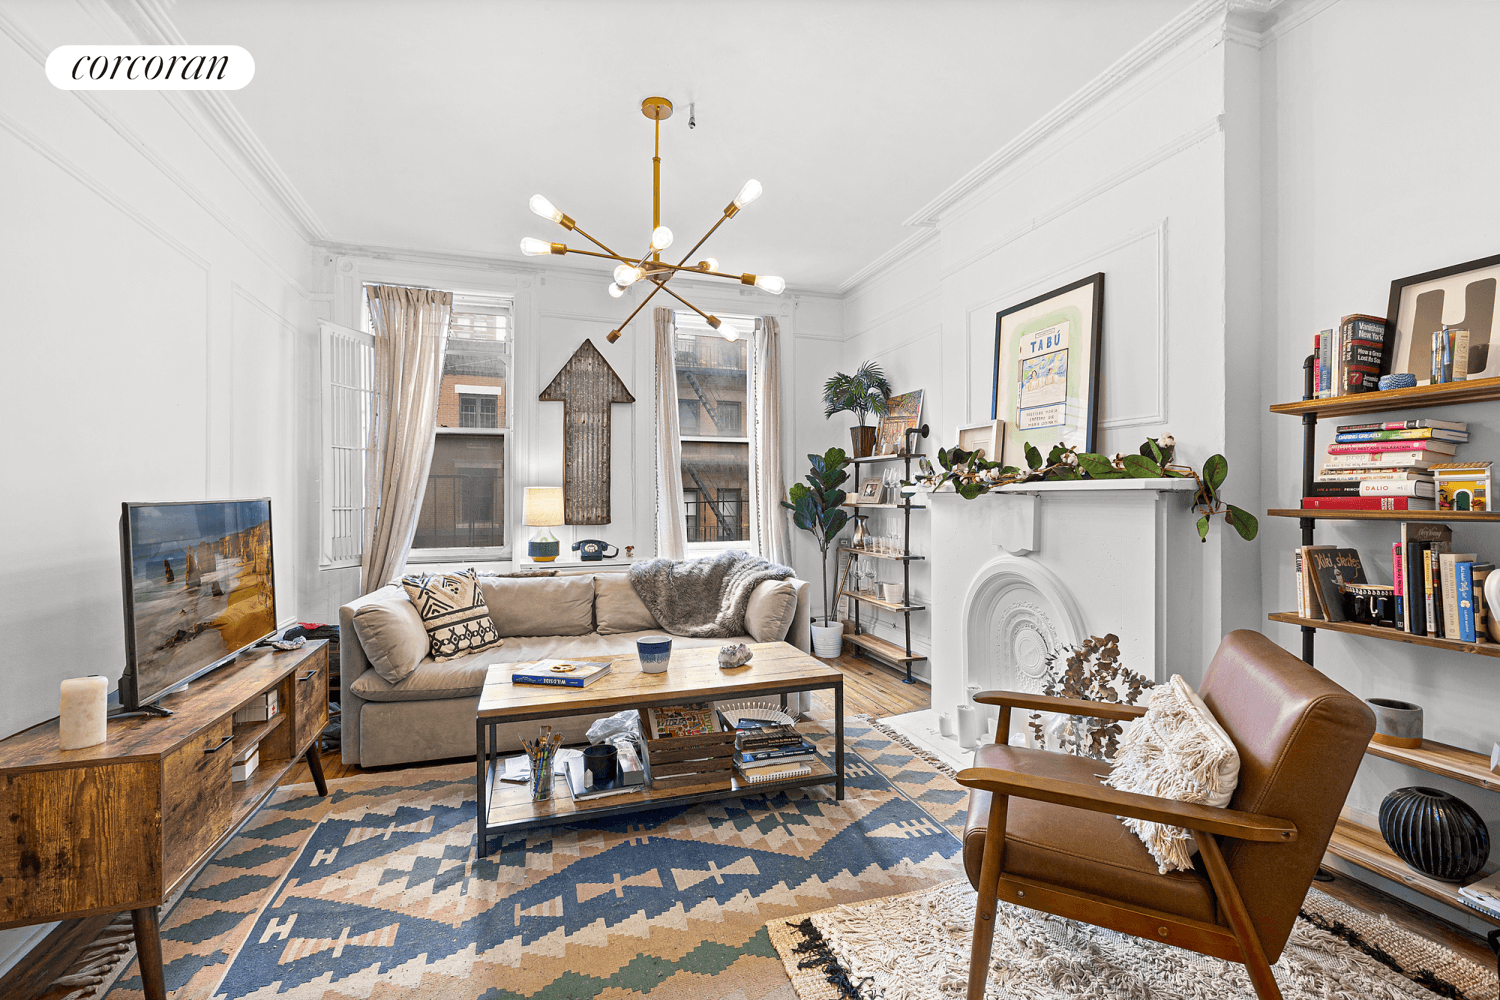 This unique one bedroom apartment is located two flights up at 256 West 15th Street, a charming brownstone building on a quiet and tree lined block in Chelsea.